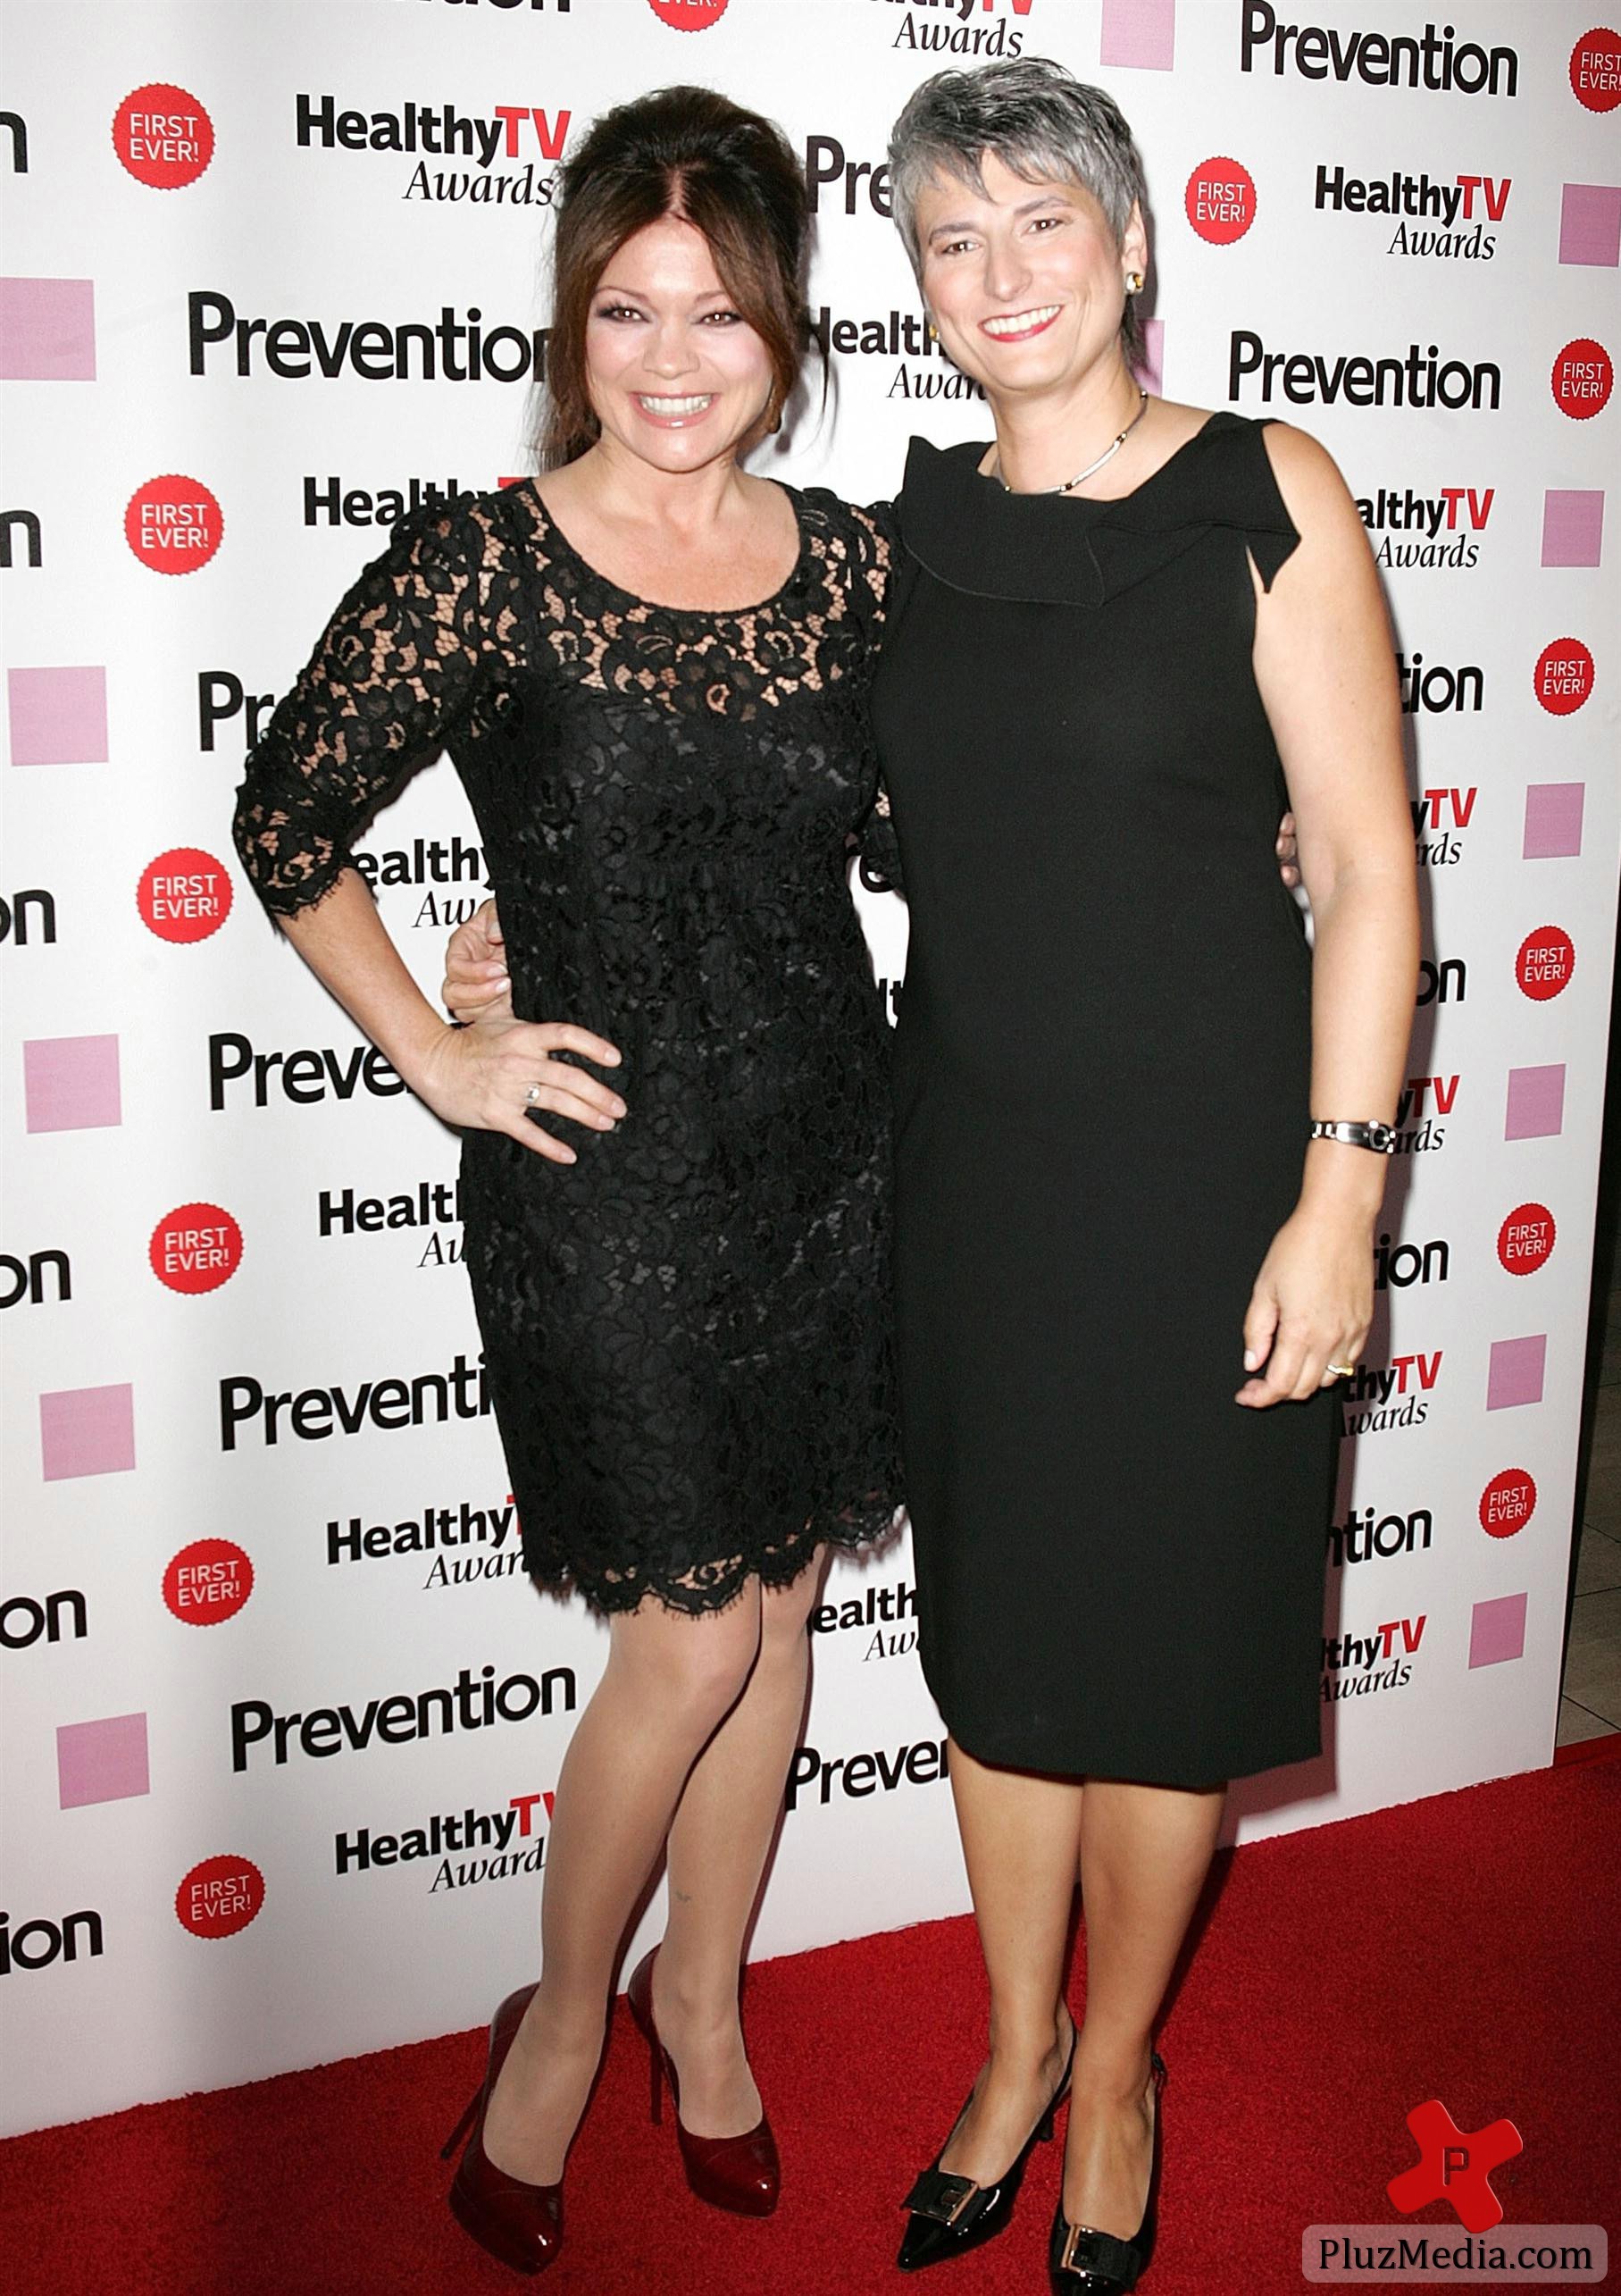 Prevention Magazine 'Healthy TV Awards' at The Paley Center | Picture 88699